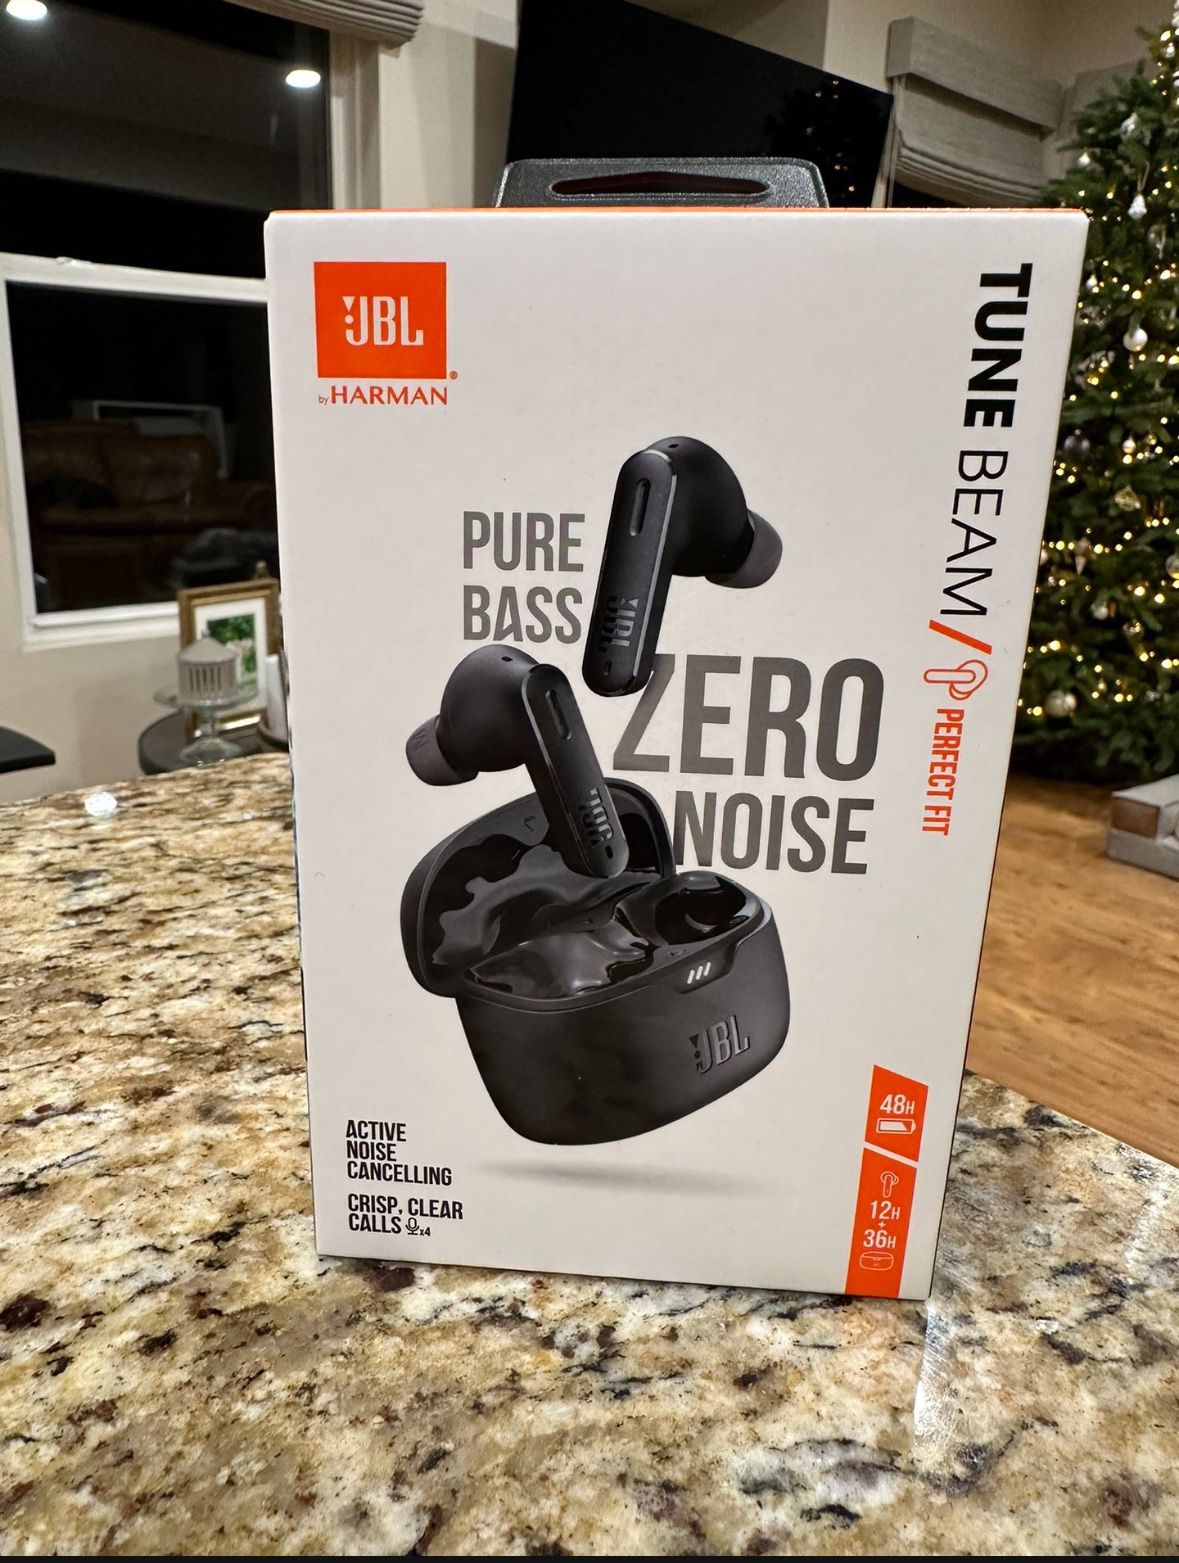 JBL * TUNE BEAM * TRUE WIRELESS EARBUDS. BRAND NEW SEALED IN THE BOX